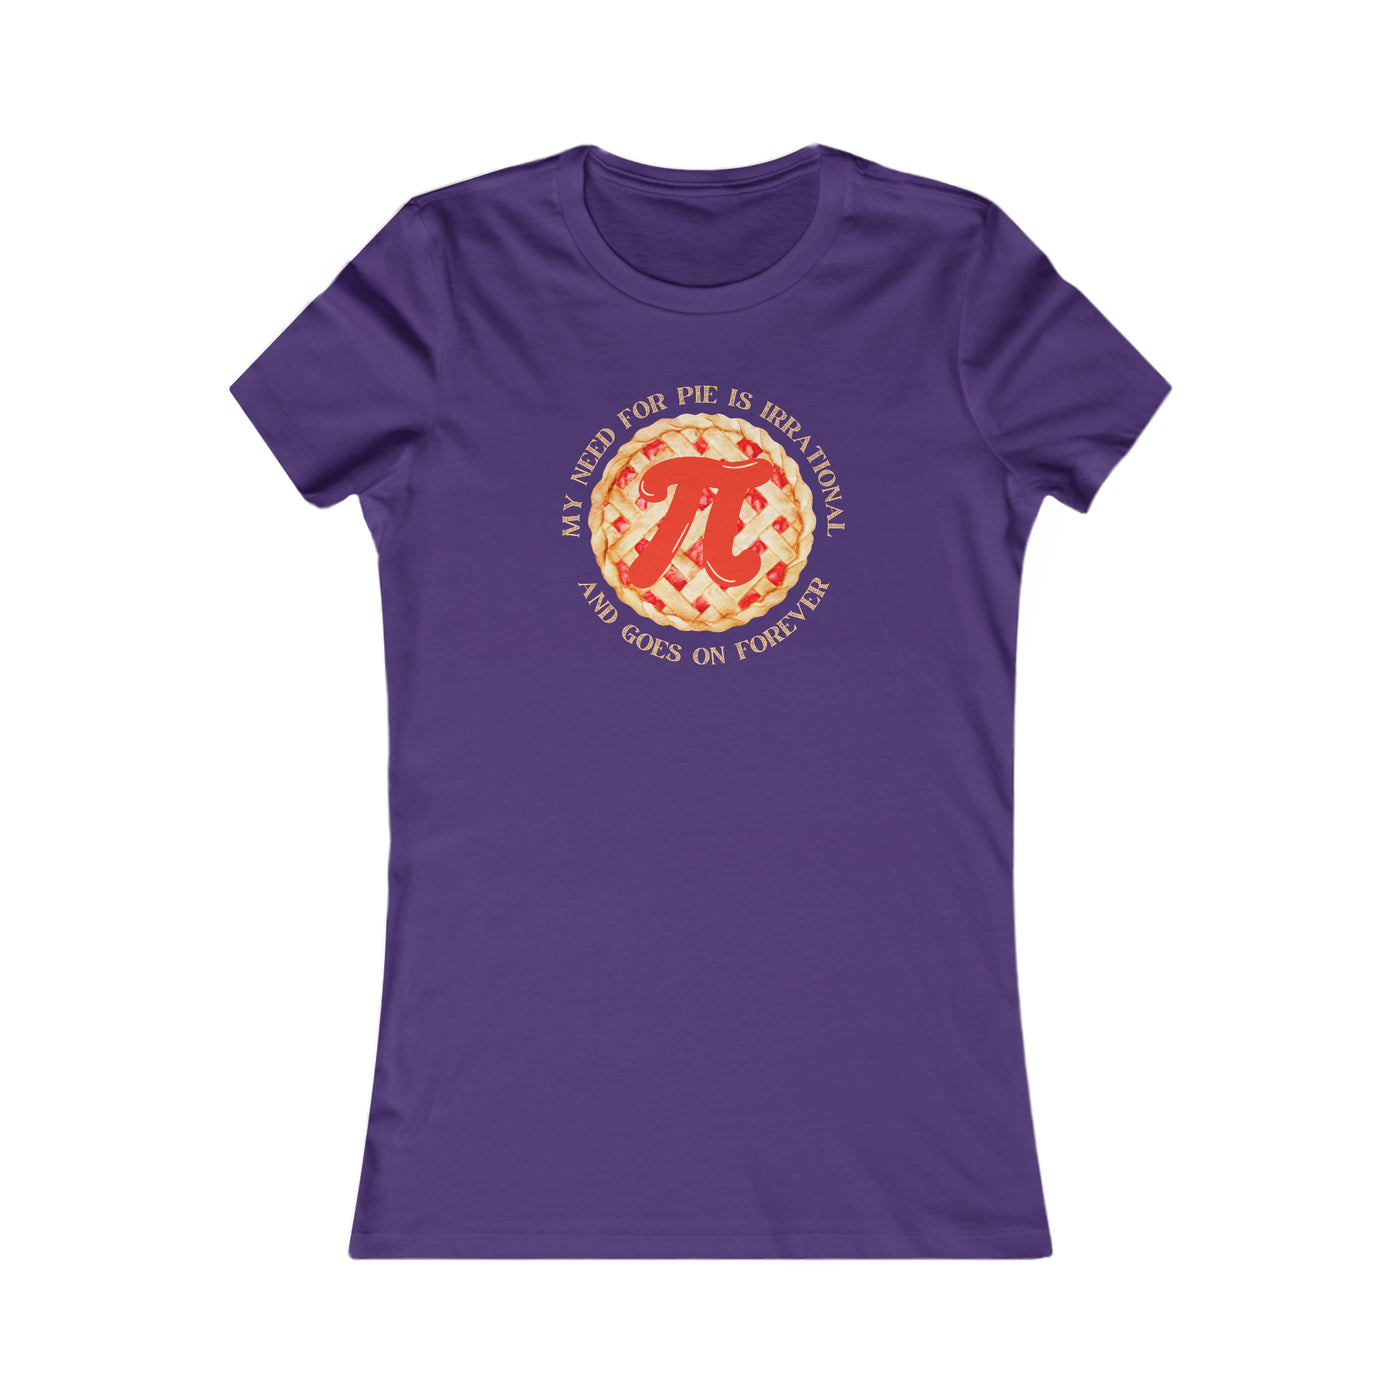 My Need For Pie Is Irrational And Goes On Forever Women's Favorite Tee